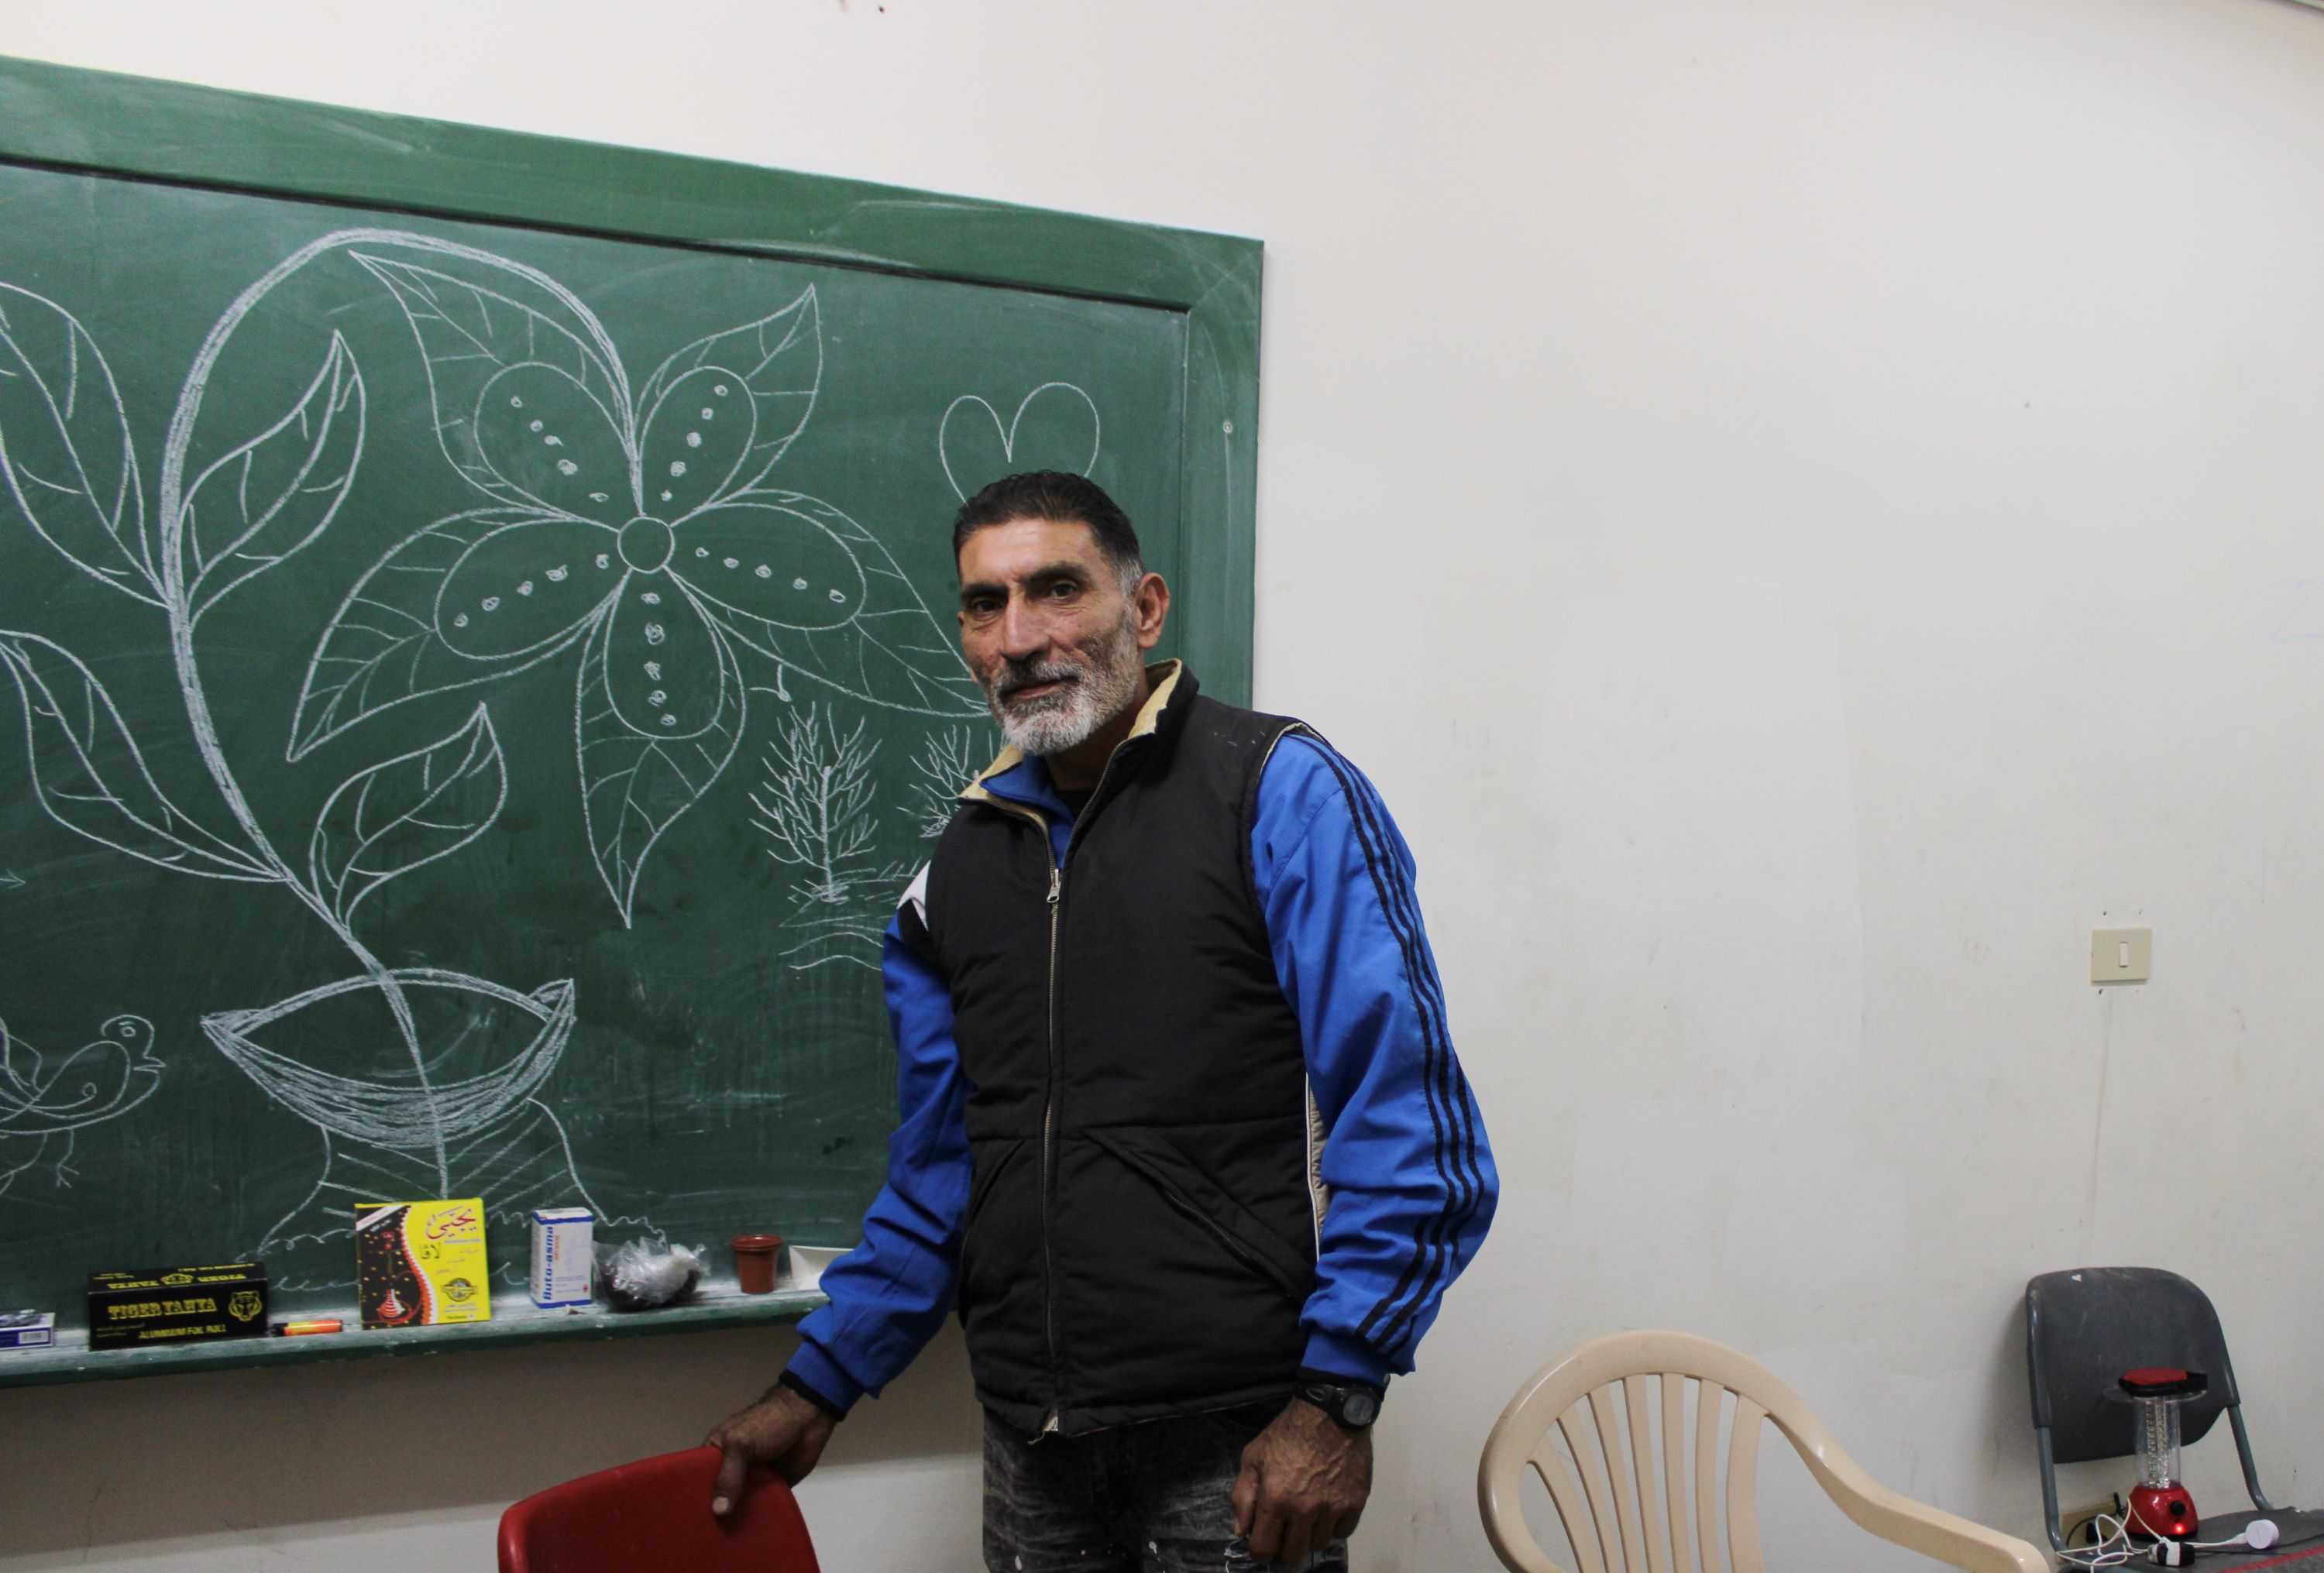 Joseph poses for a photo with his flowers in his room in the displacement shelter (Hanna Davis/MEE)